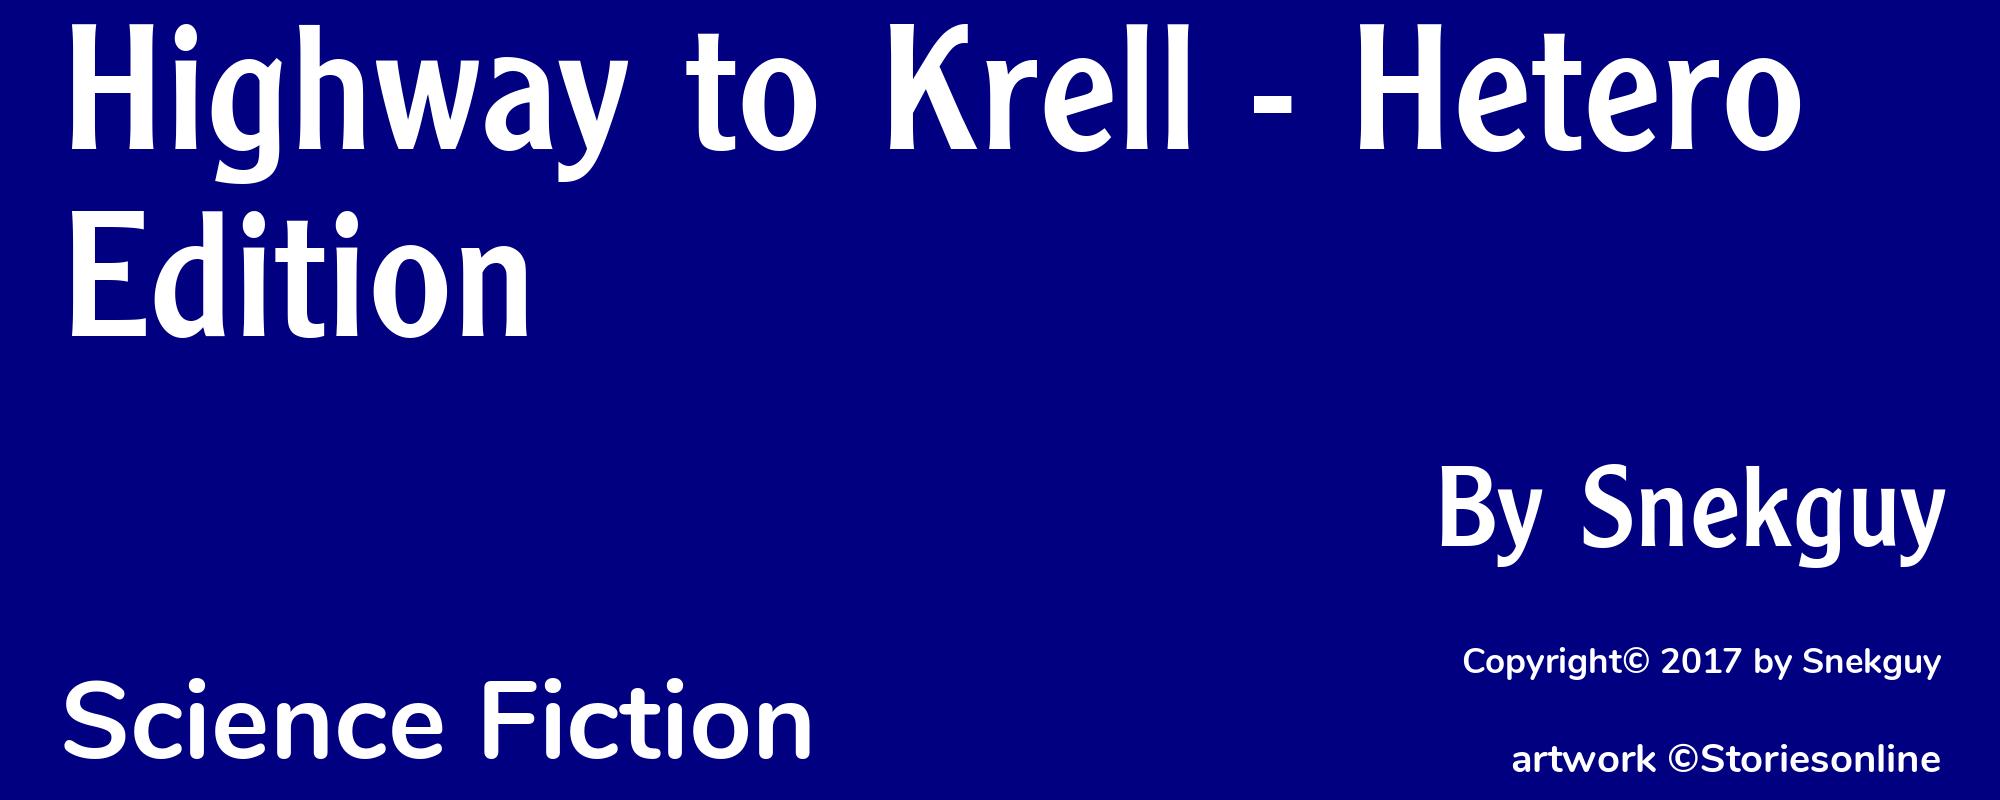 Highway to Krell - Hetero Edition - Cover